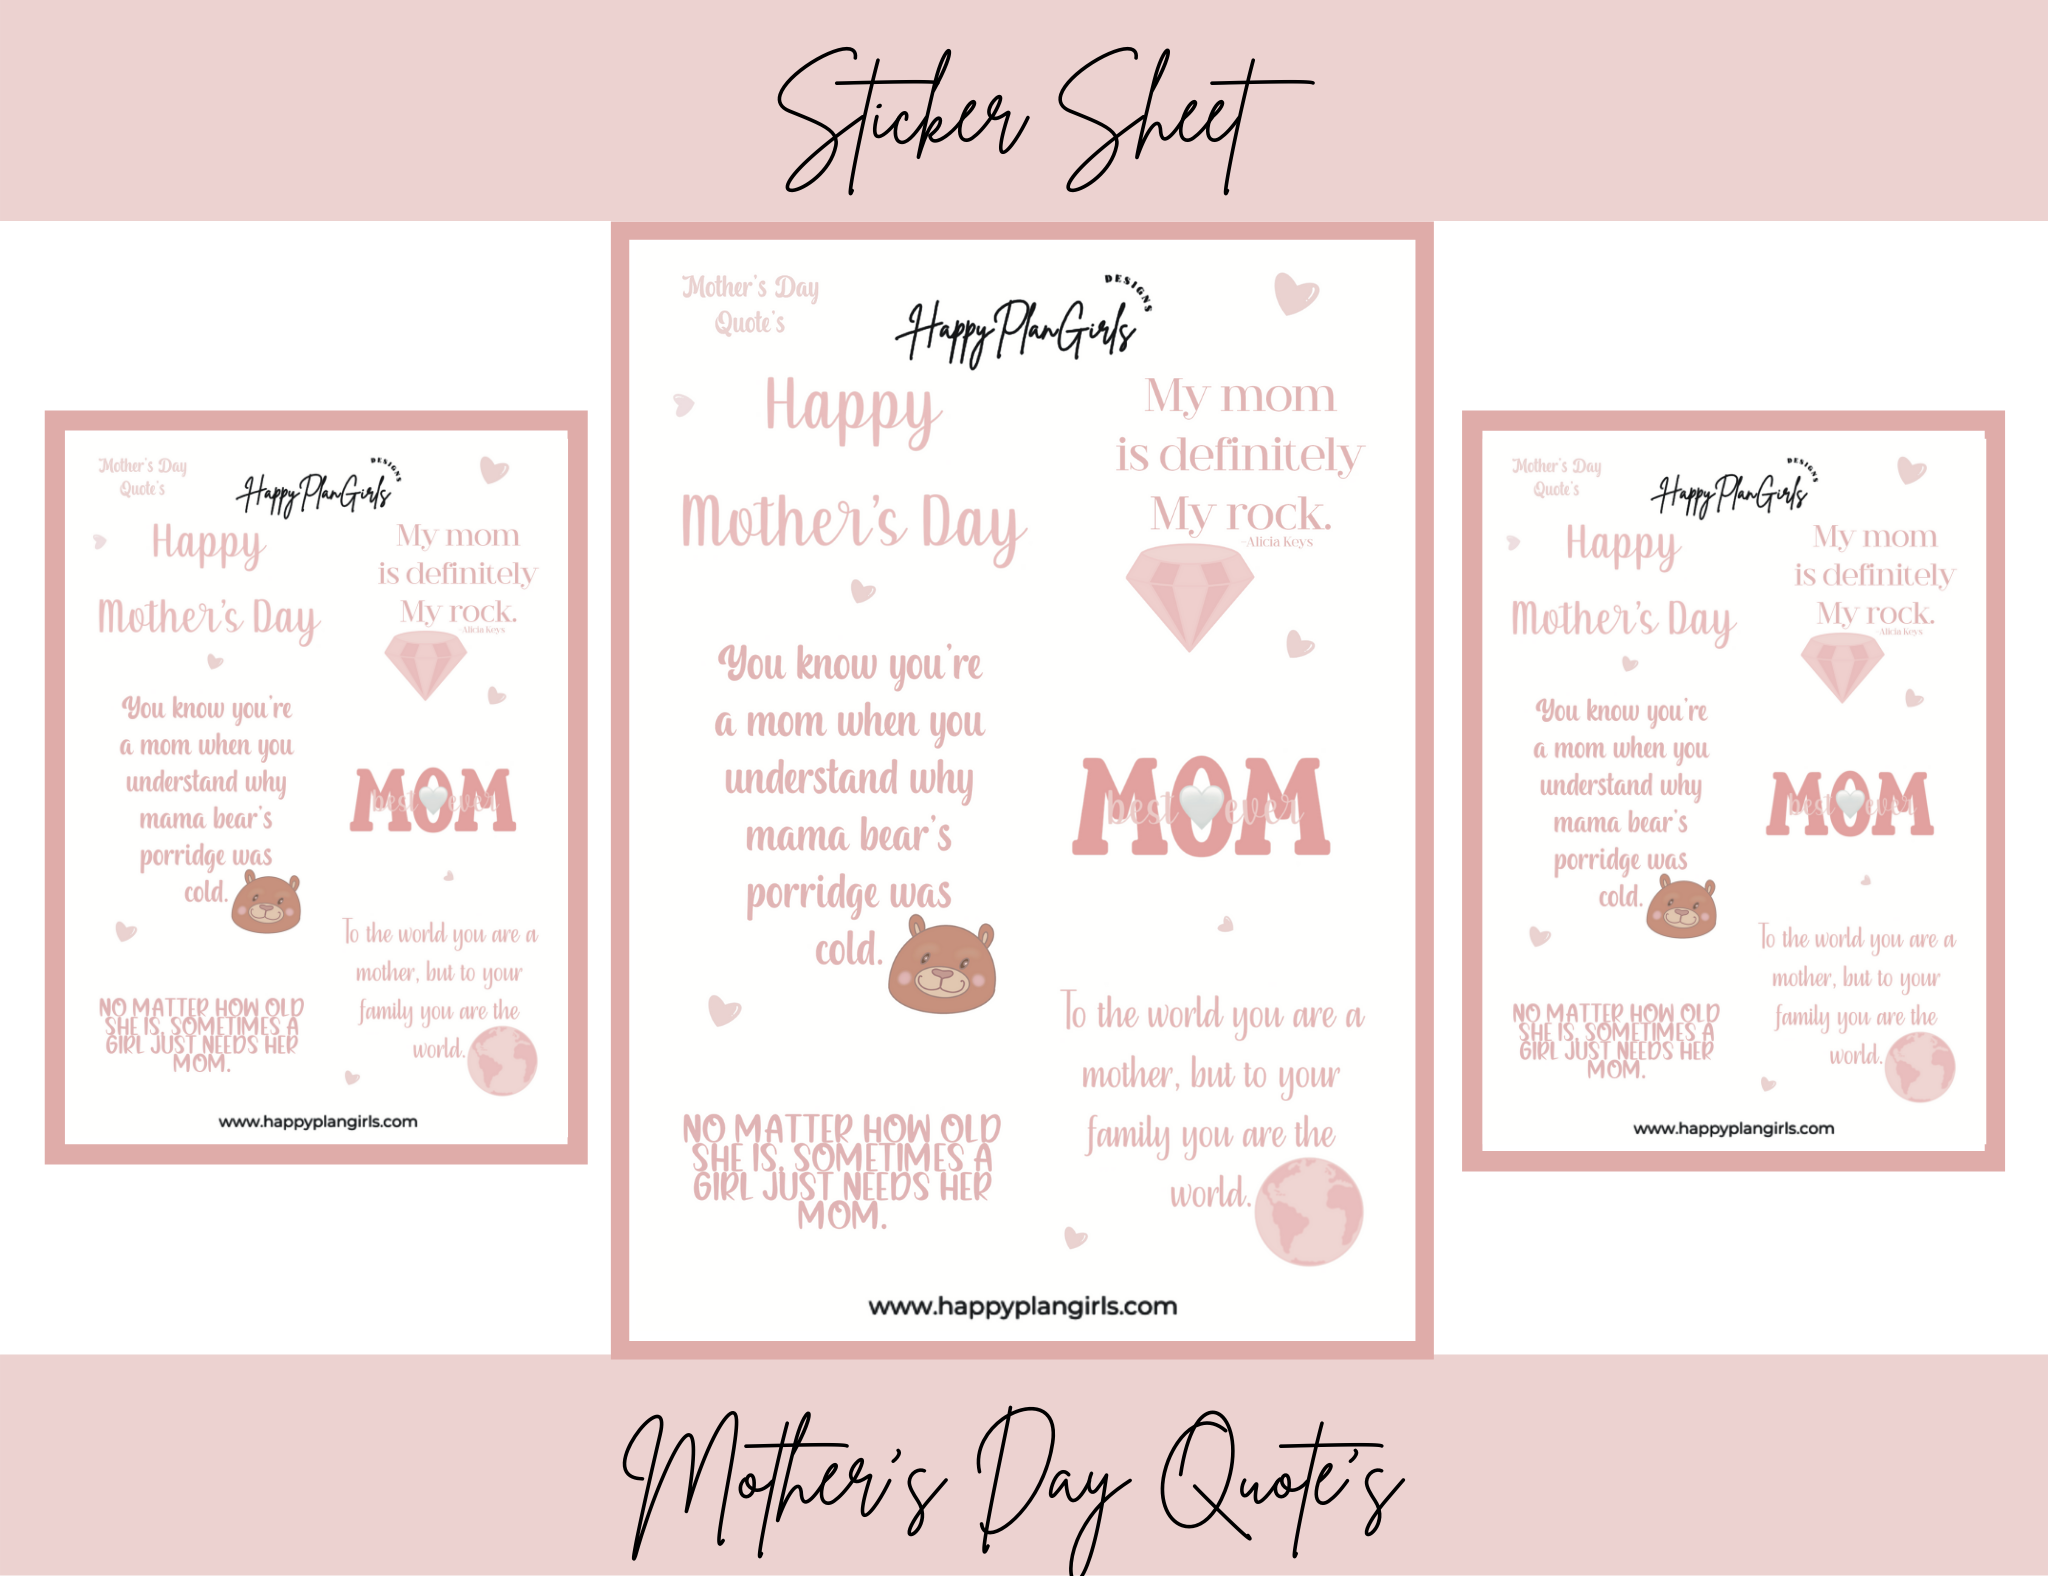 Mother's Day Quote's Sticker Sheet